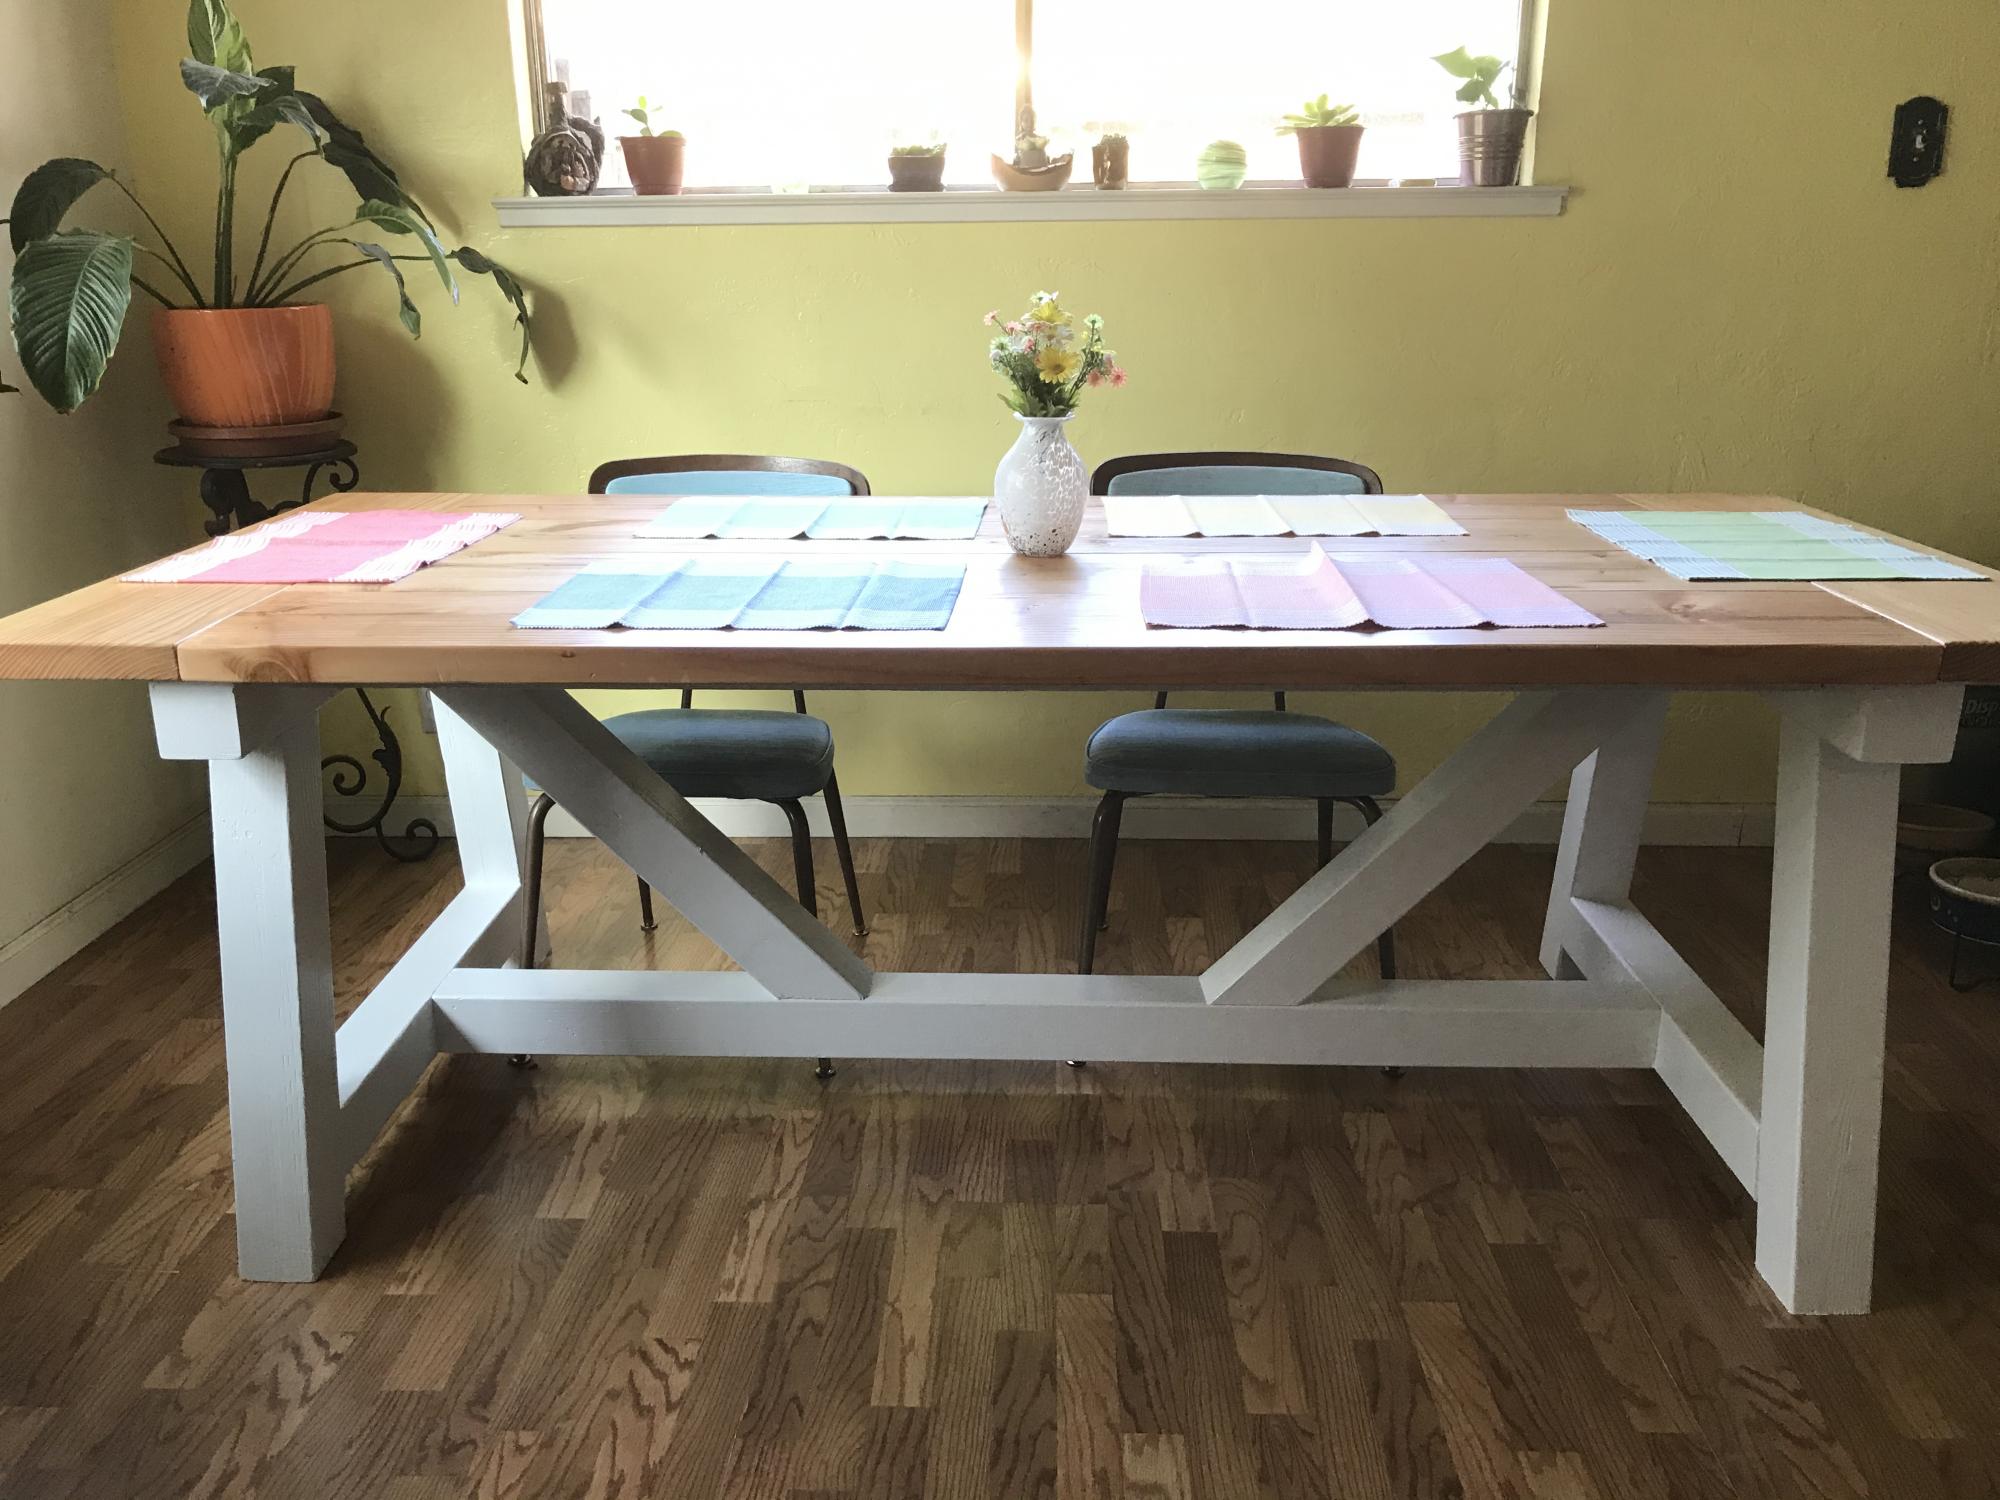 kitchen table plans mortise drawer